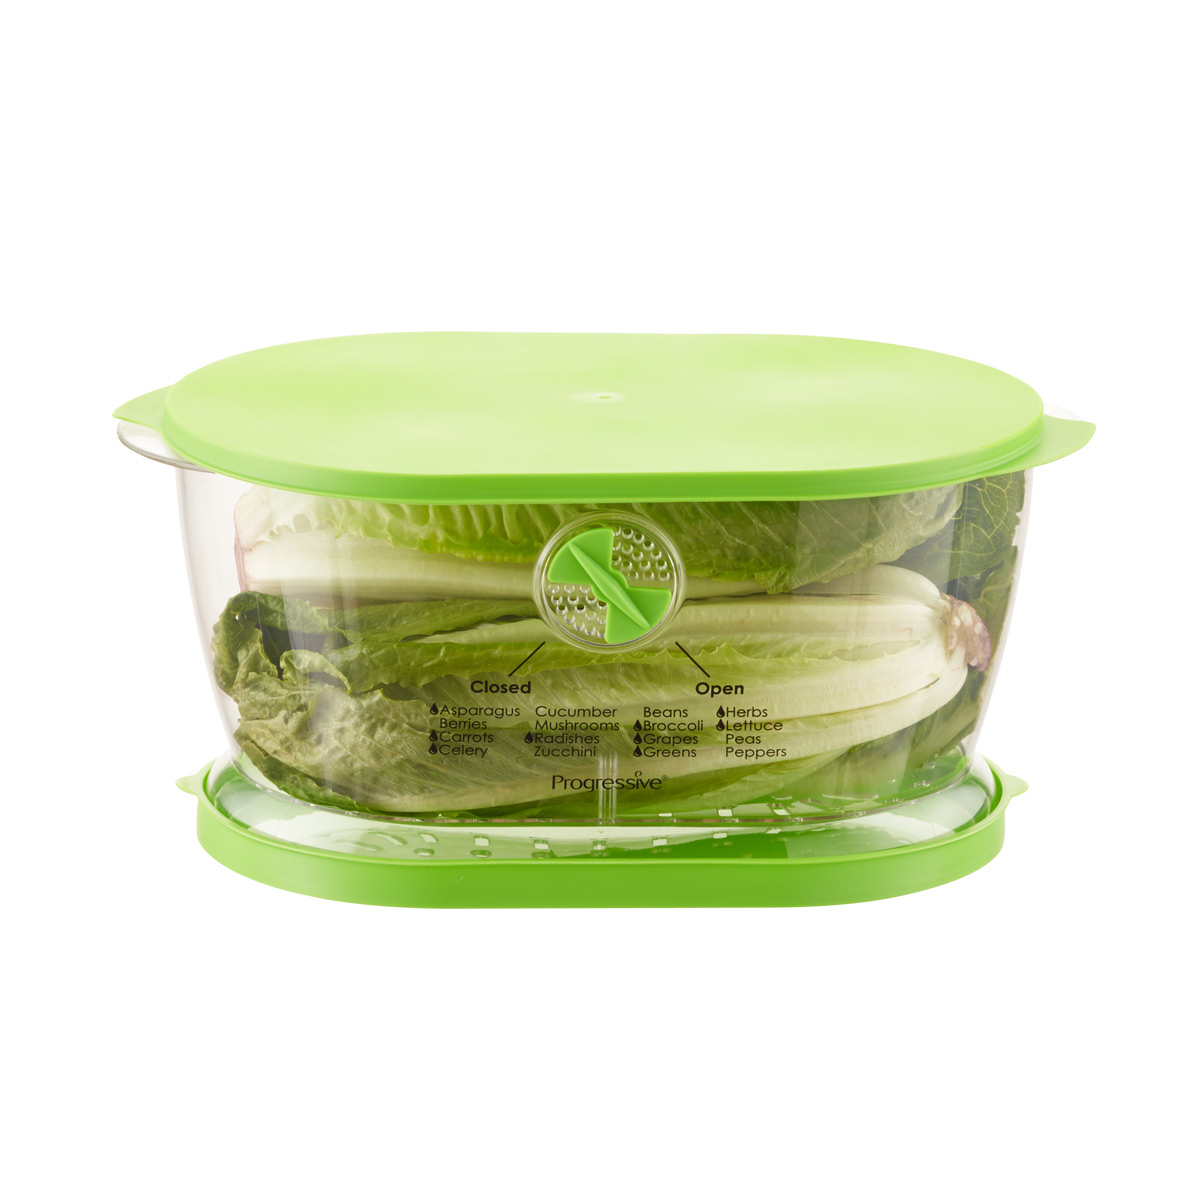 https://www.containerstore.com/catalogimages/314750/10042017-lettuce-keeper.jpg